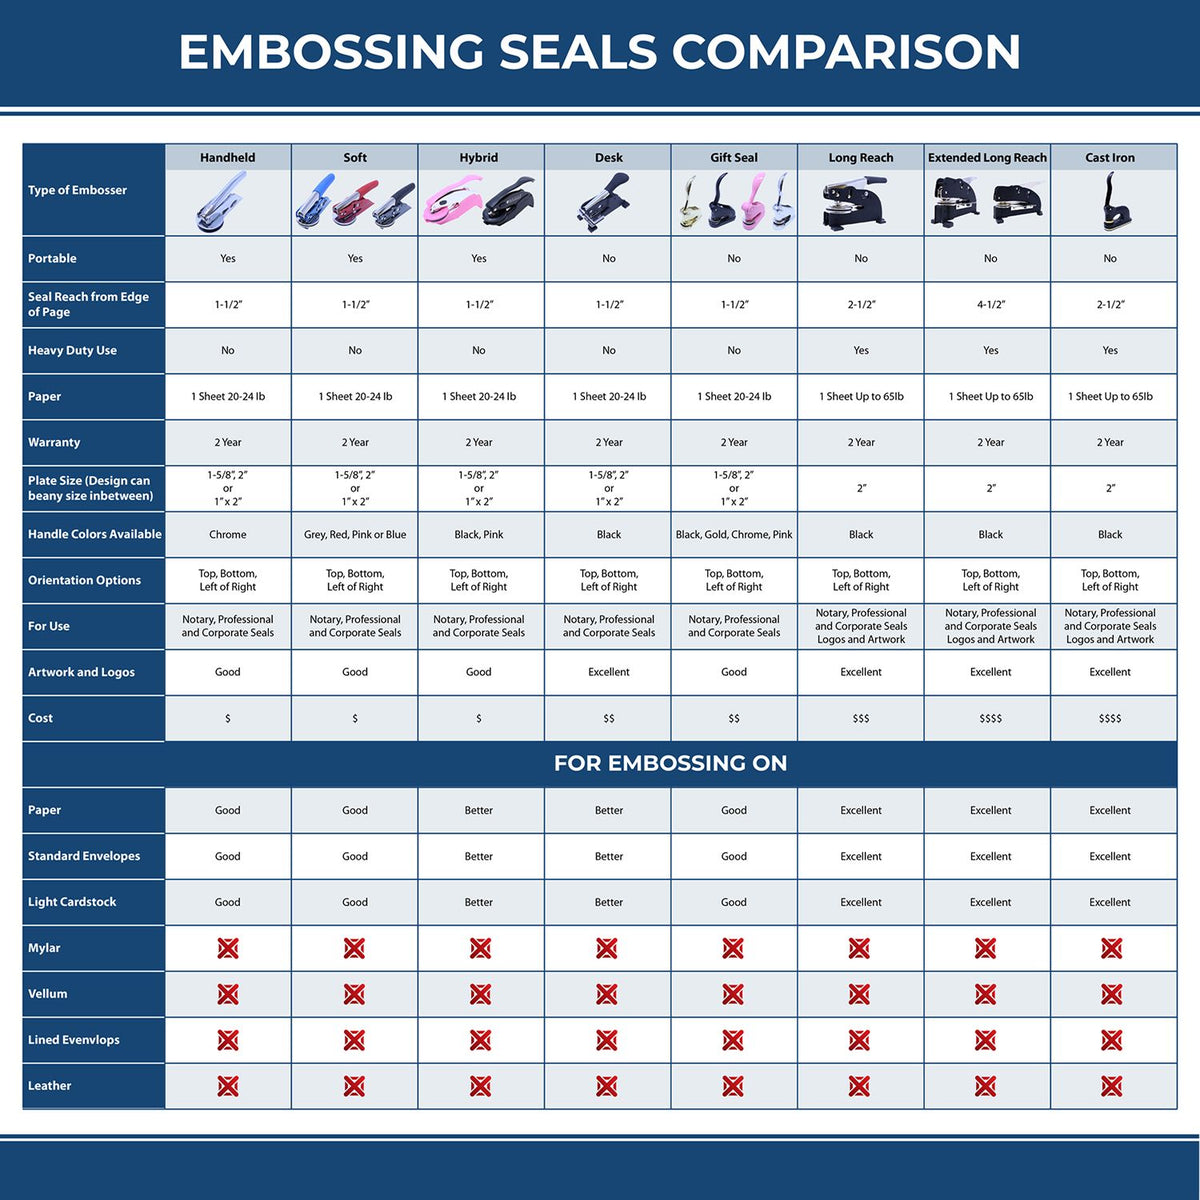 A comparison chart for the different types of mount models available for the State of Guam Soft Land Surveyor Embossing Seal.